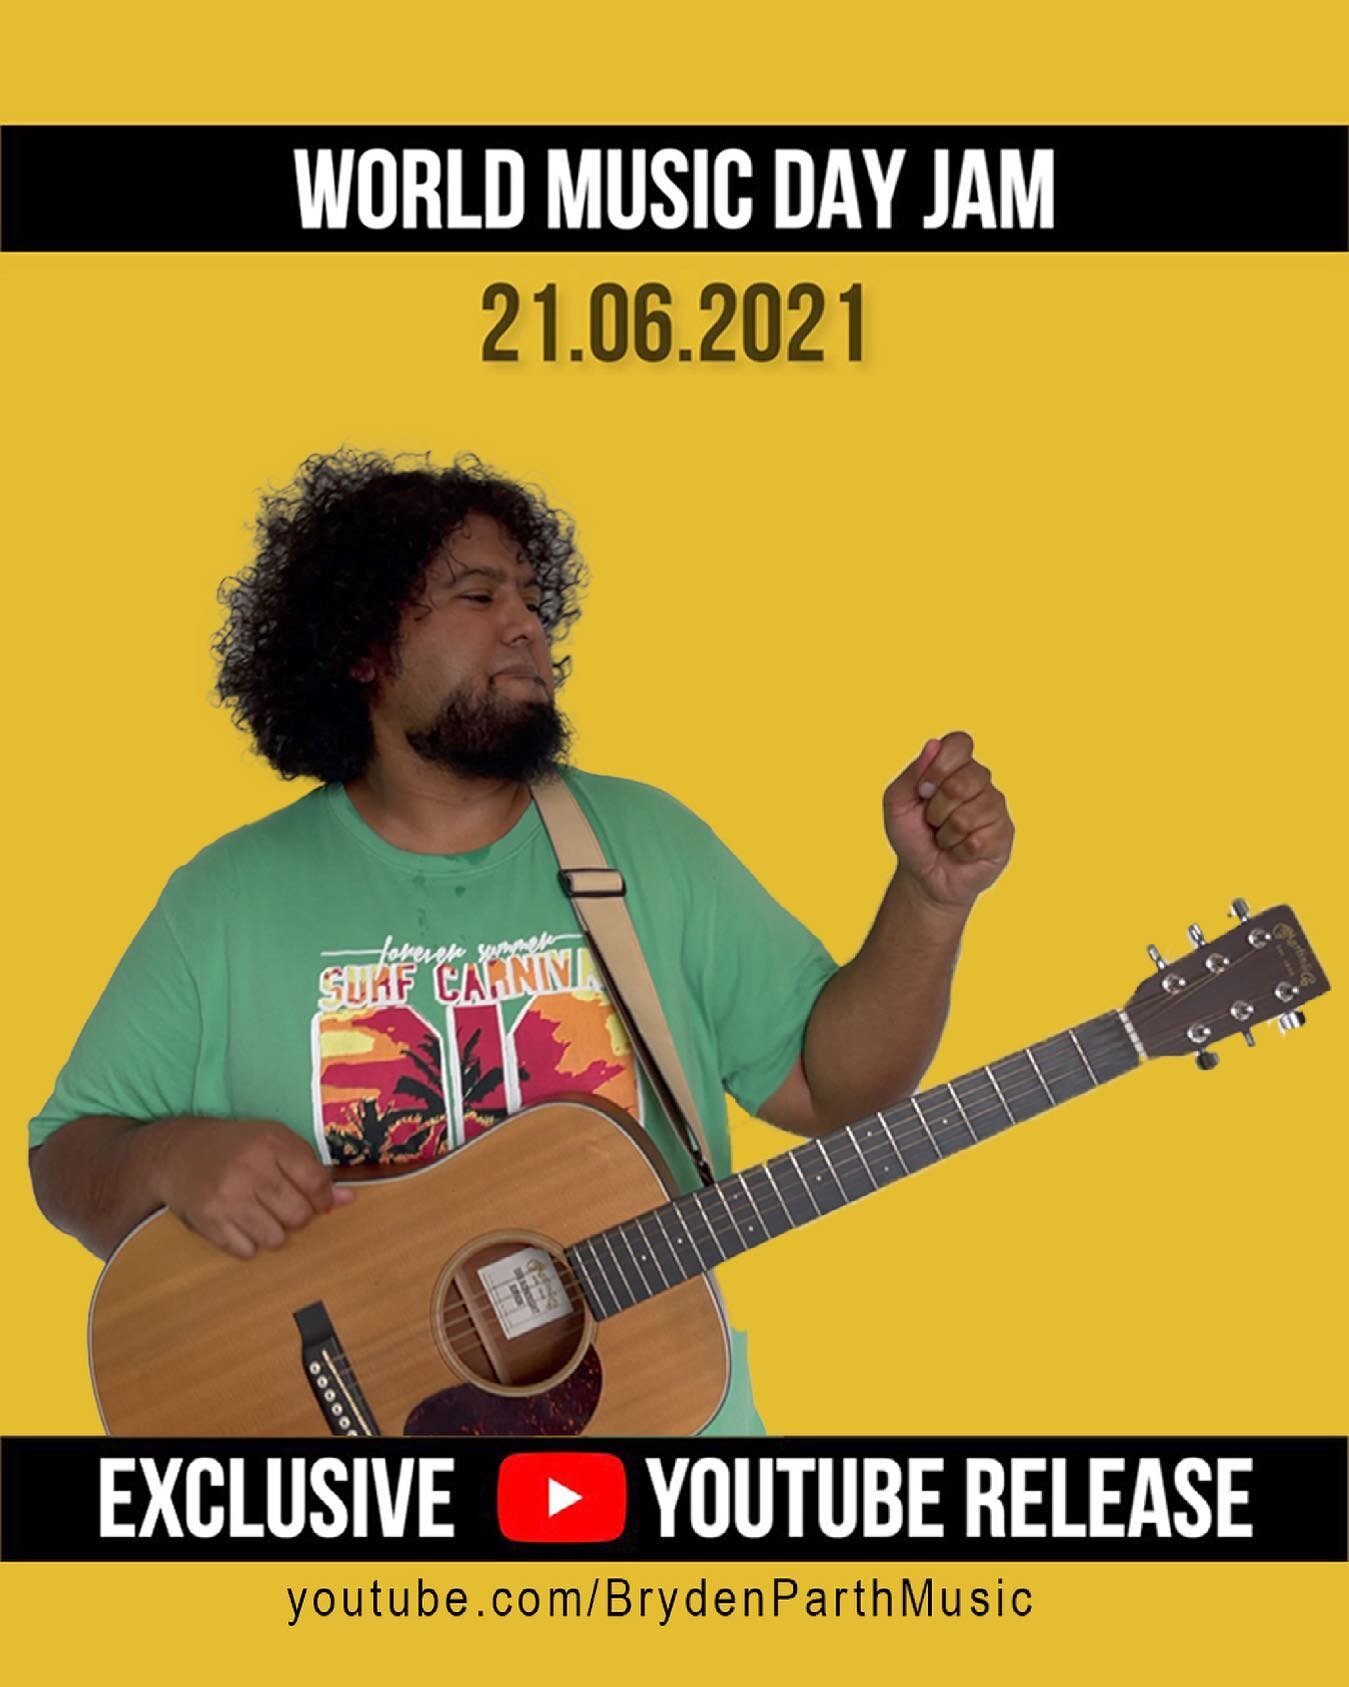 We&rsquo;re dropping a brand spanking new cover on the 21st of June, at 6pm! 🎵💃🏻

That&rsquo;s right, we&rsquo;re celebrating World Music Day with a &lsquo;locked in&rsquo; video release exclusively on our YouTube channel! We&rsquo;re all in this 